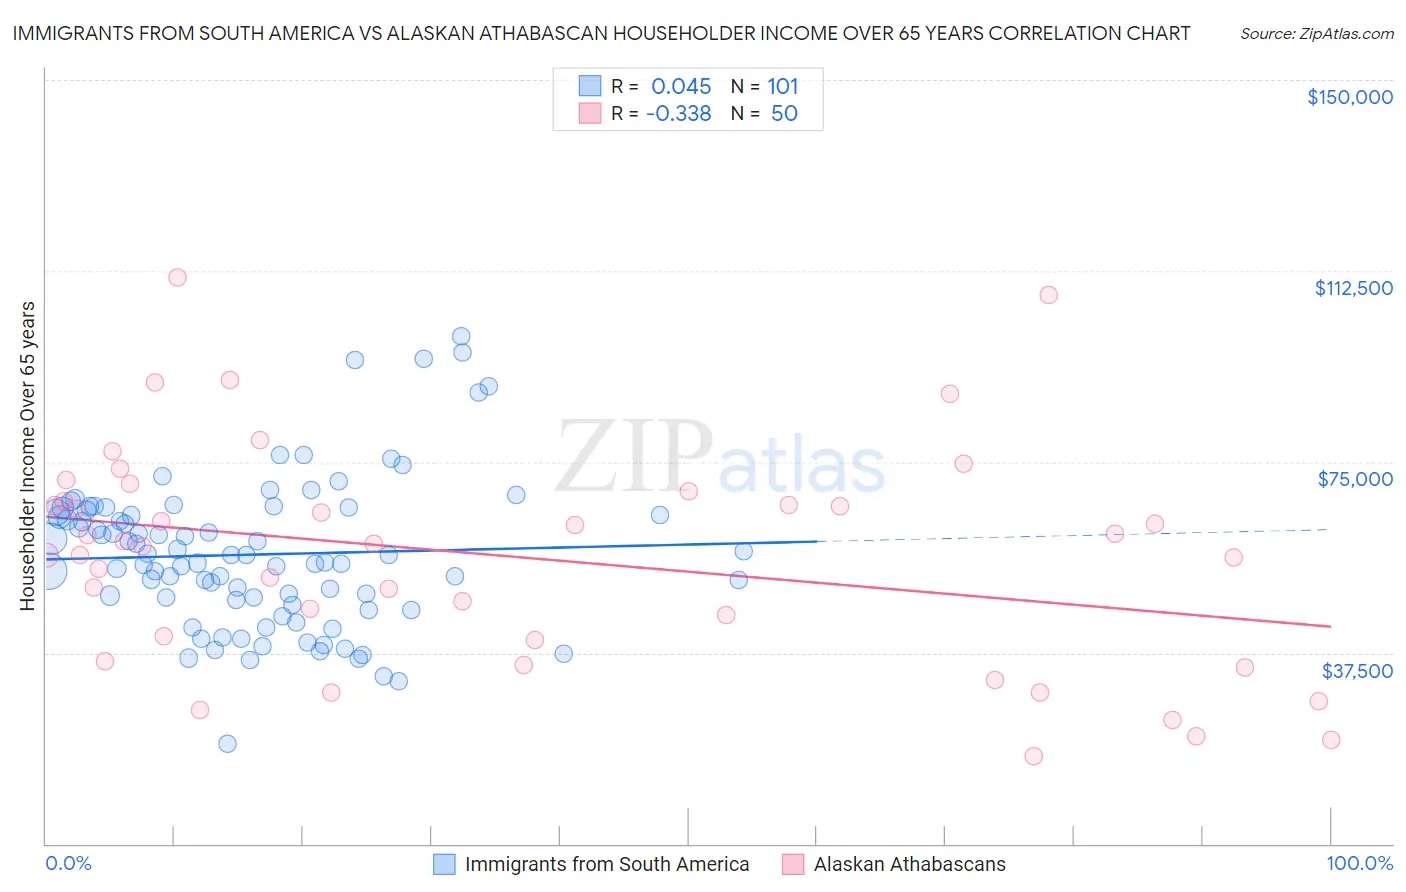 Immigrants from South America vs Alaskan Athabascan Householder Income Over 65 years